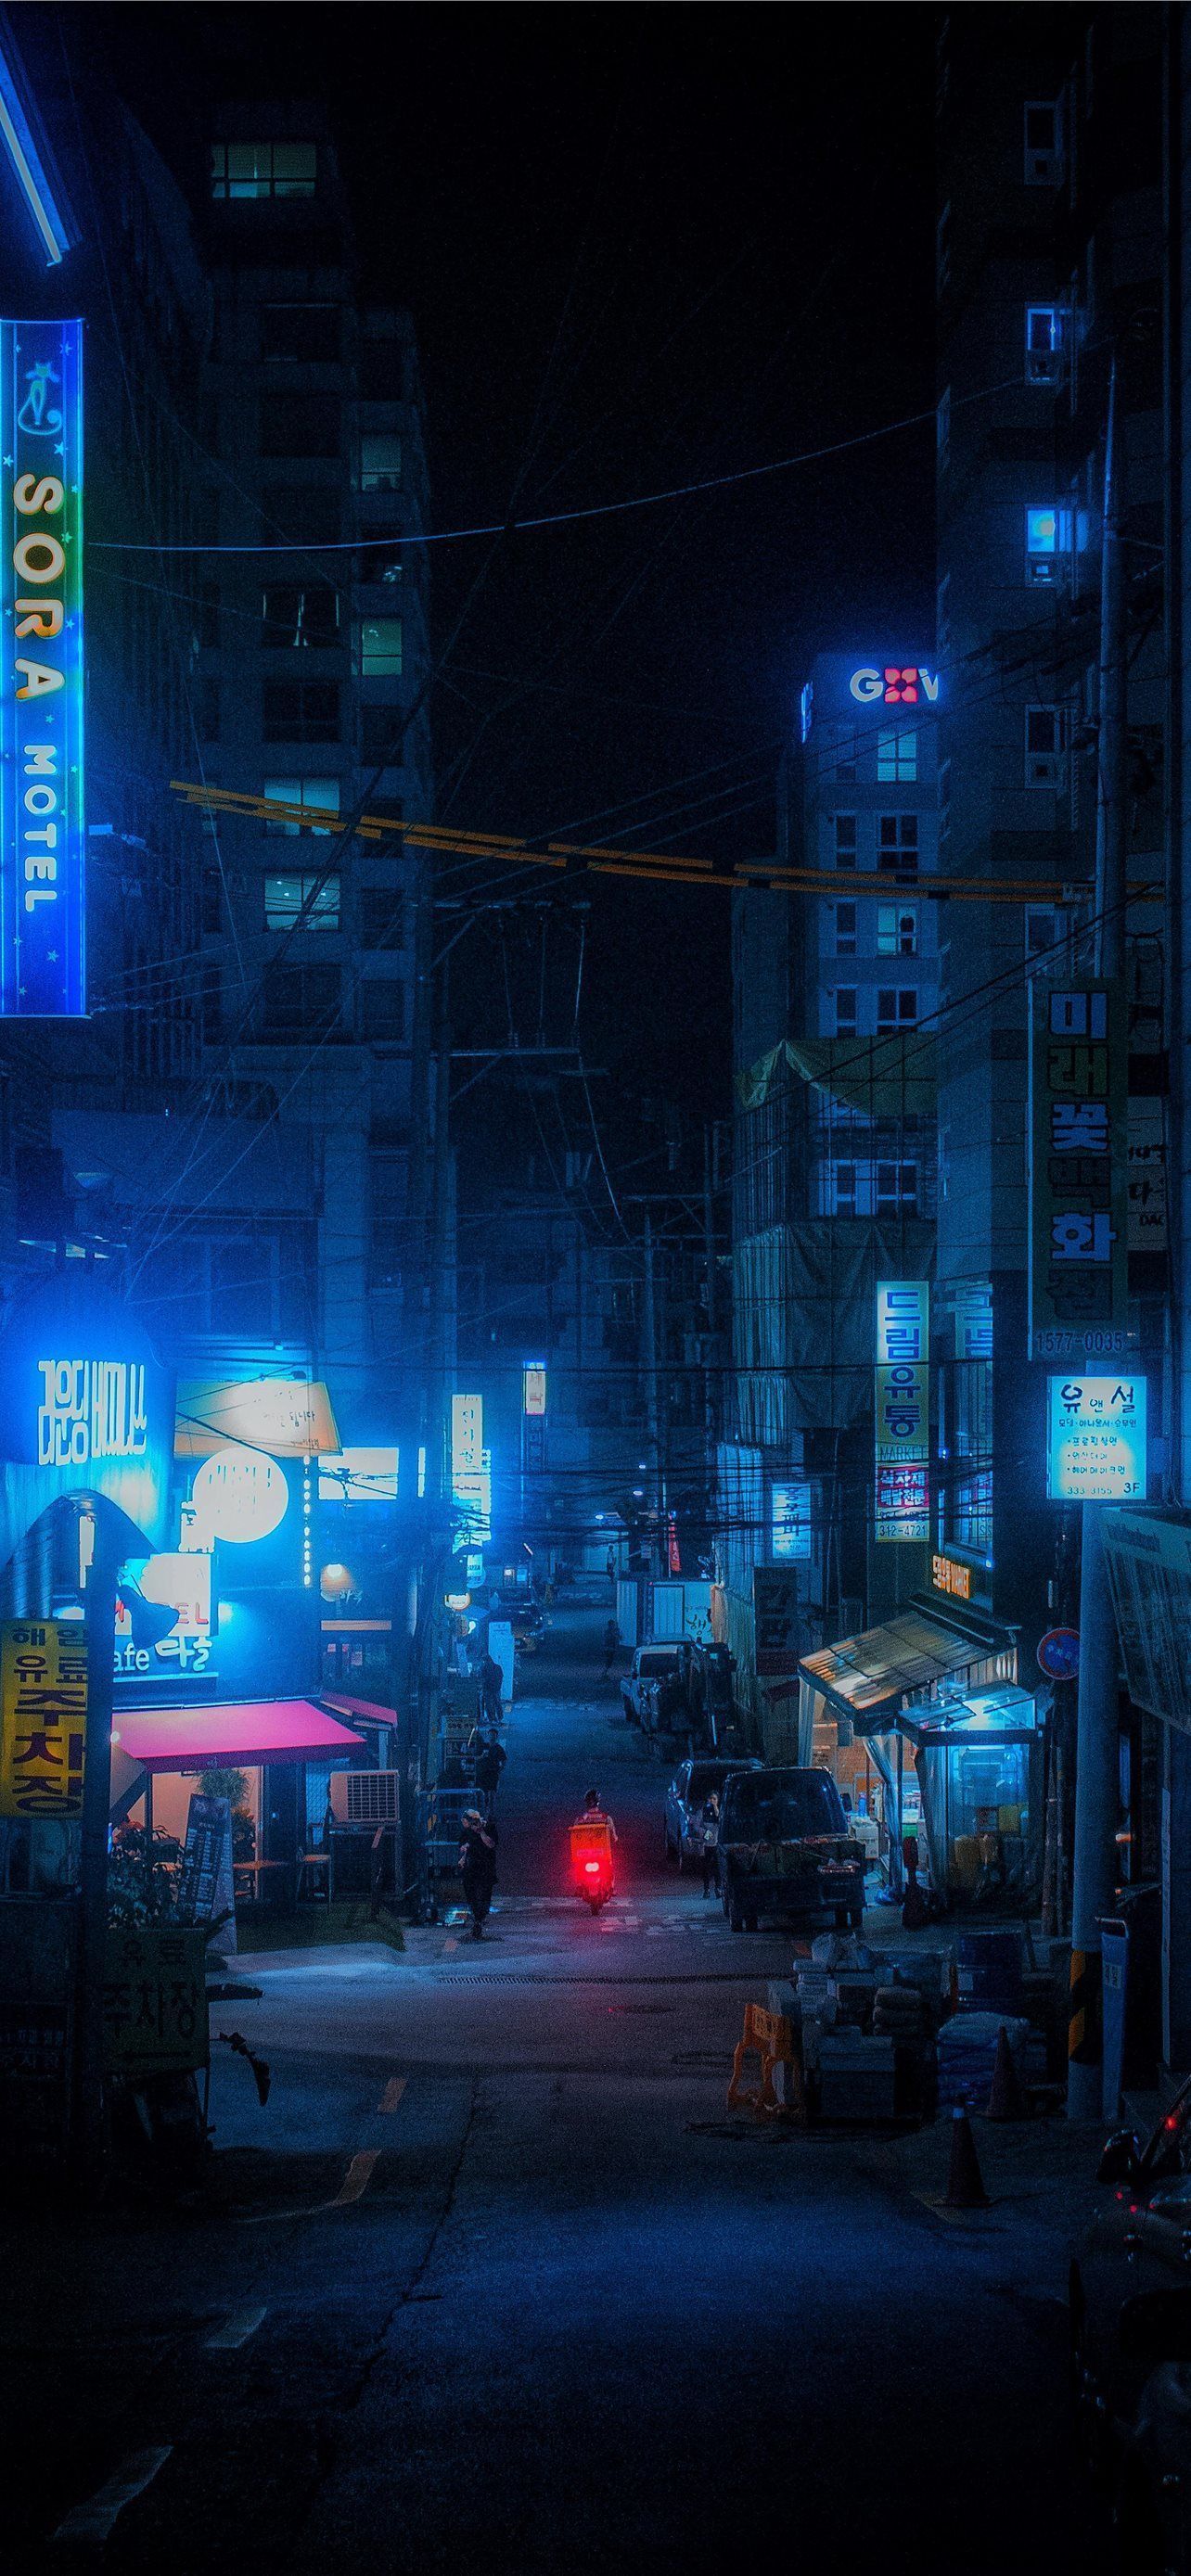 Aesthetic wallpaper of a neon lit city street at night - Seoul